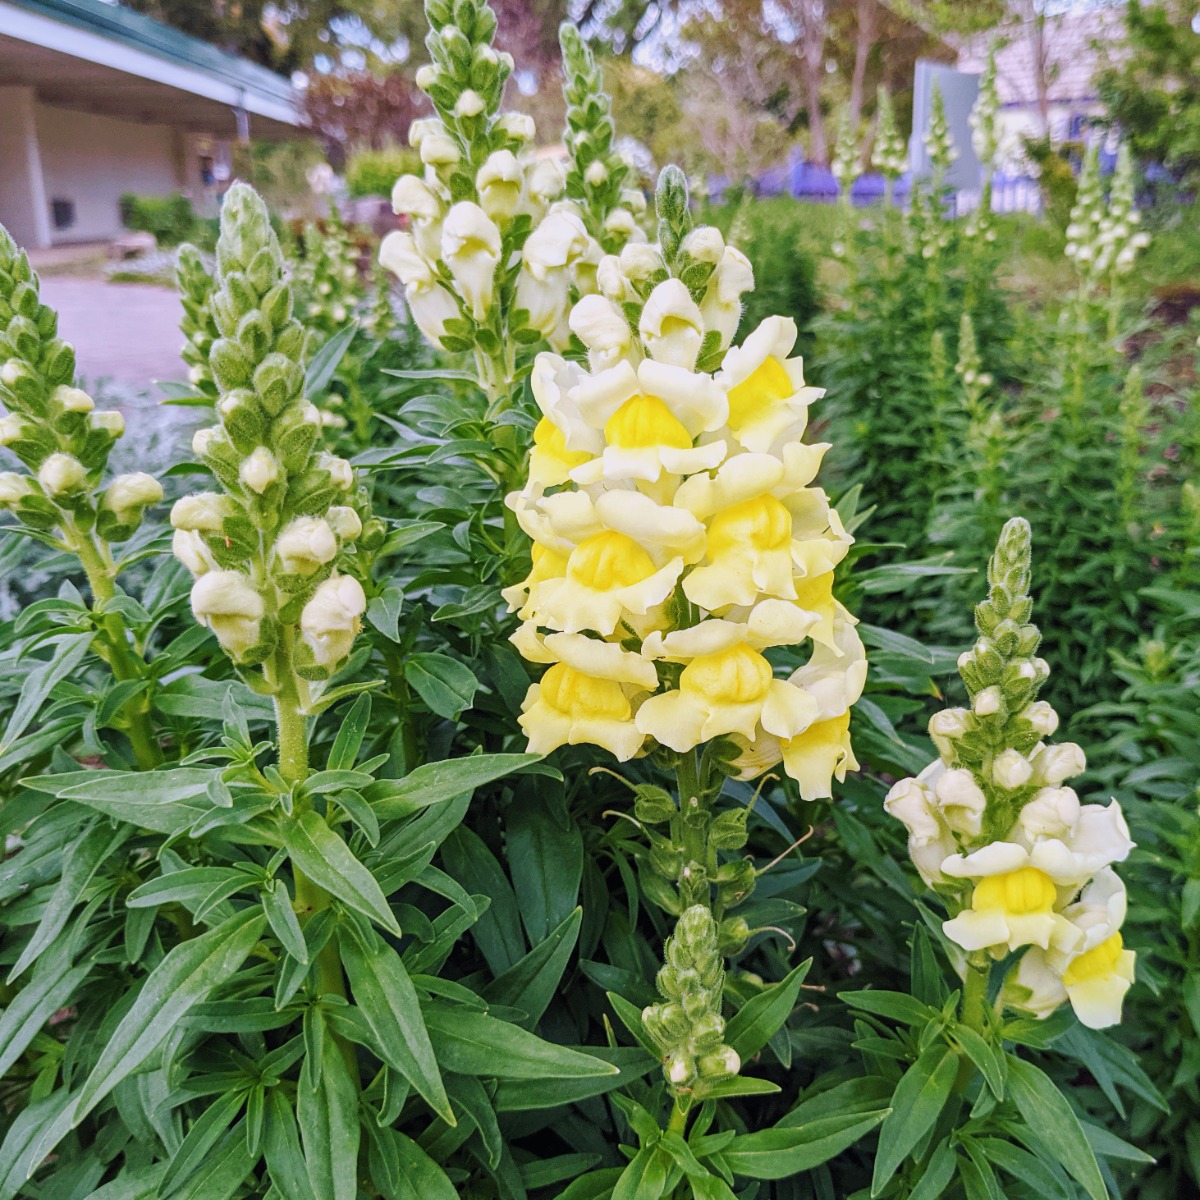 Yellow Snapdragons at Airlie Gardens in North Carolina